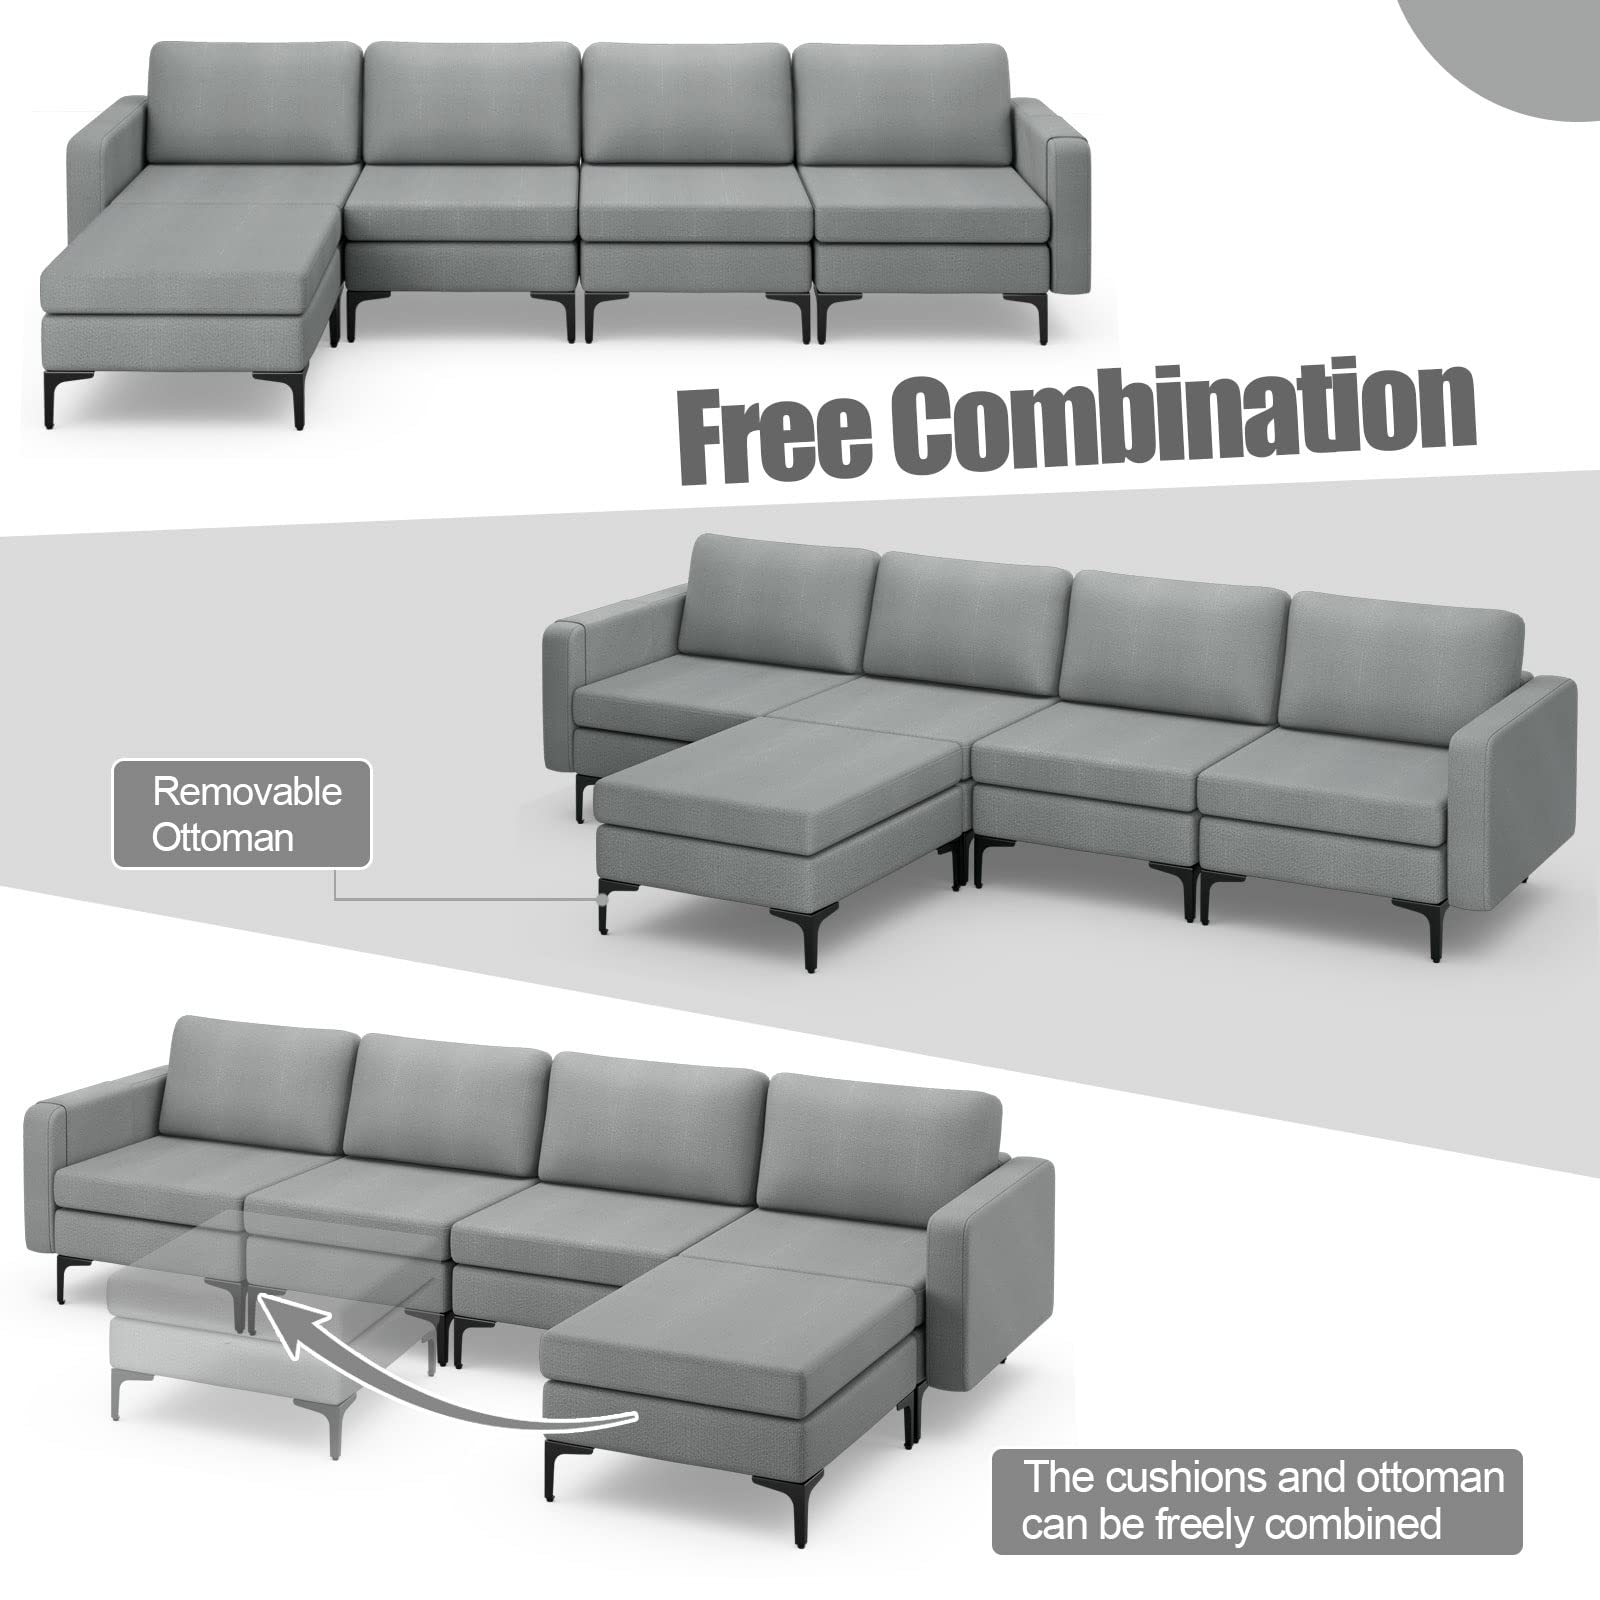 Giantex 4 Seat Convertible Sofa Couch, 123" L Sectional Sleeper with 2 or 1 USB Ports Socket